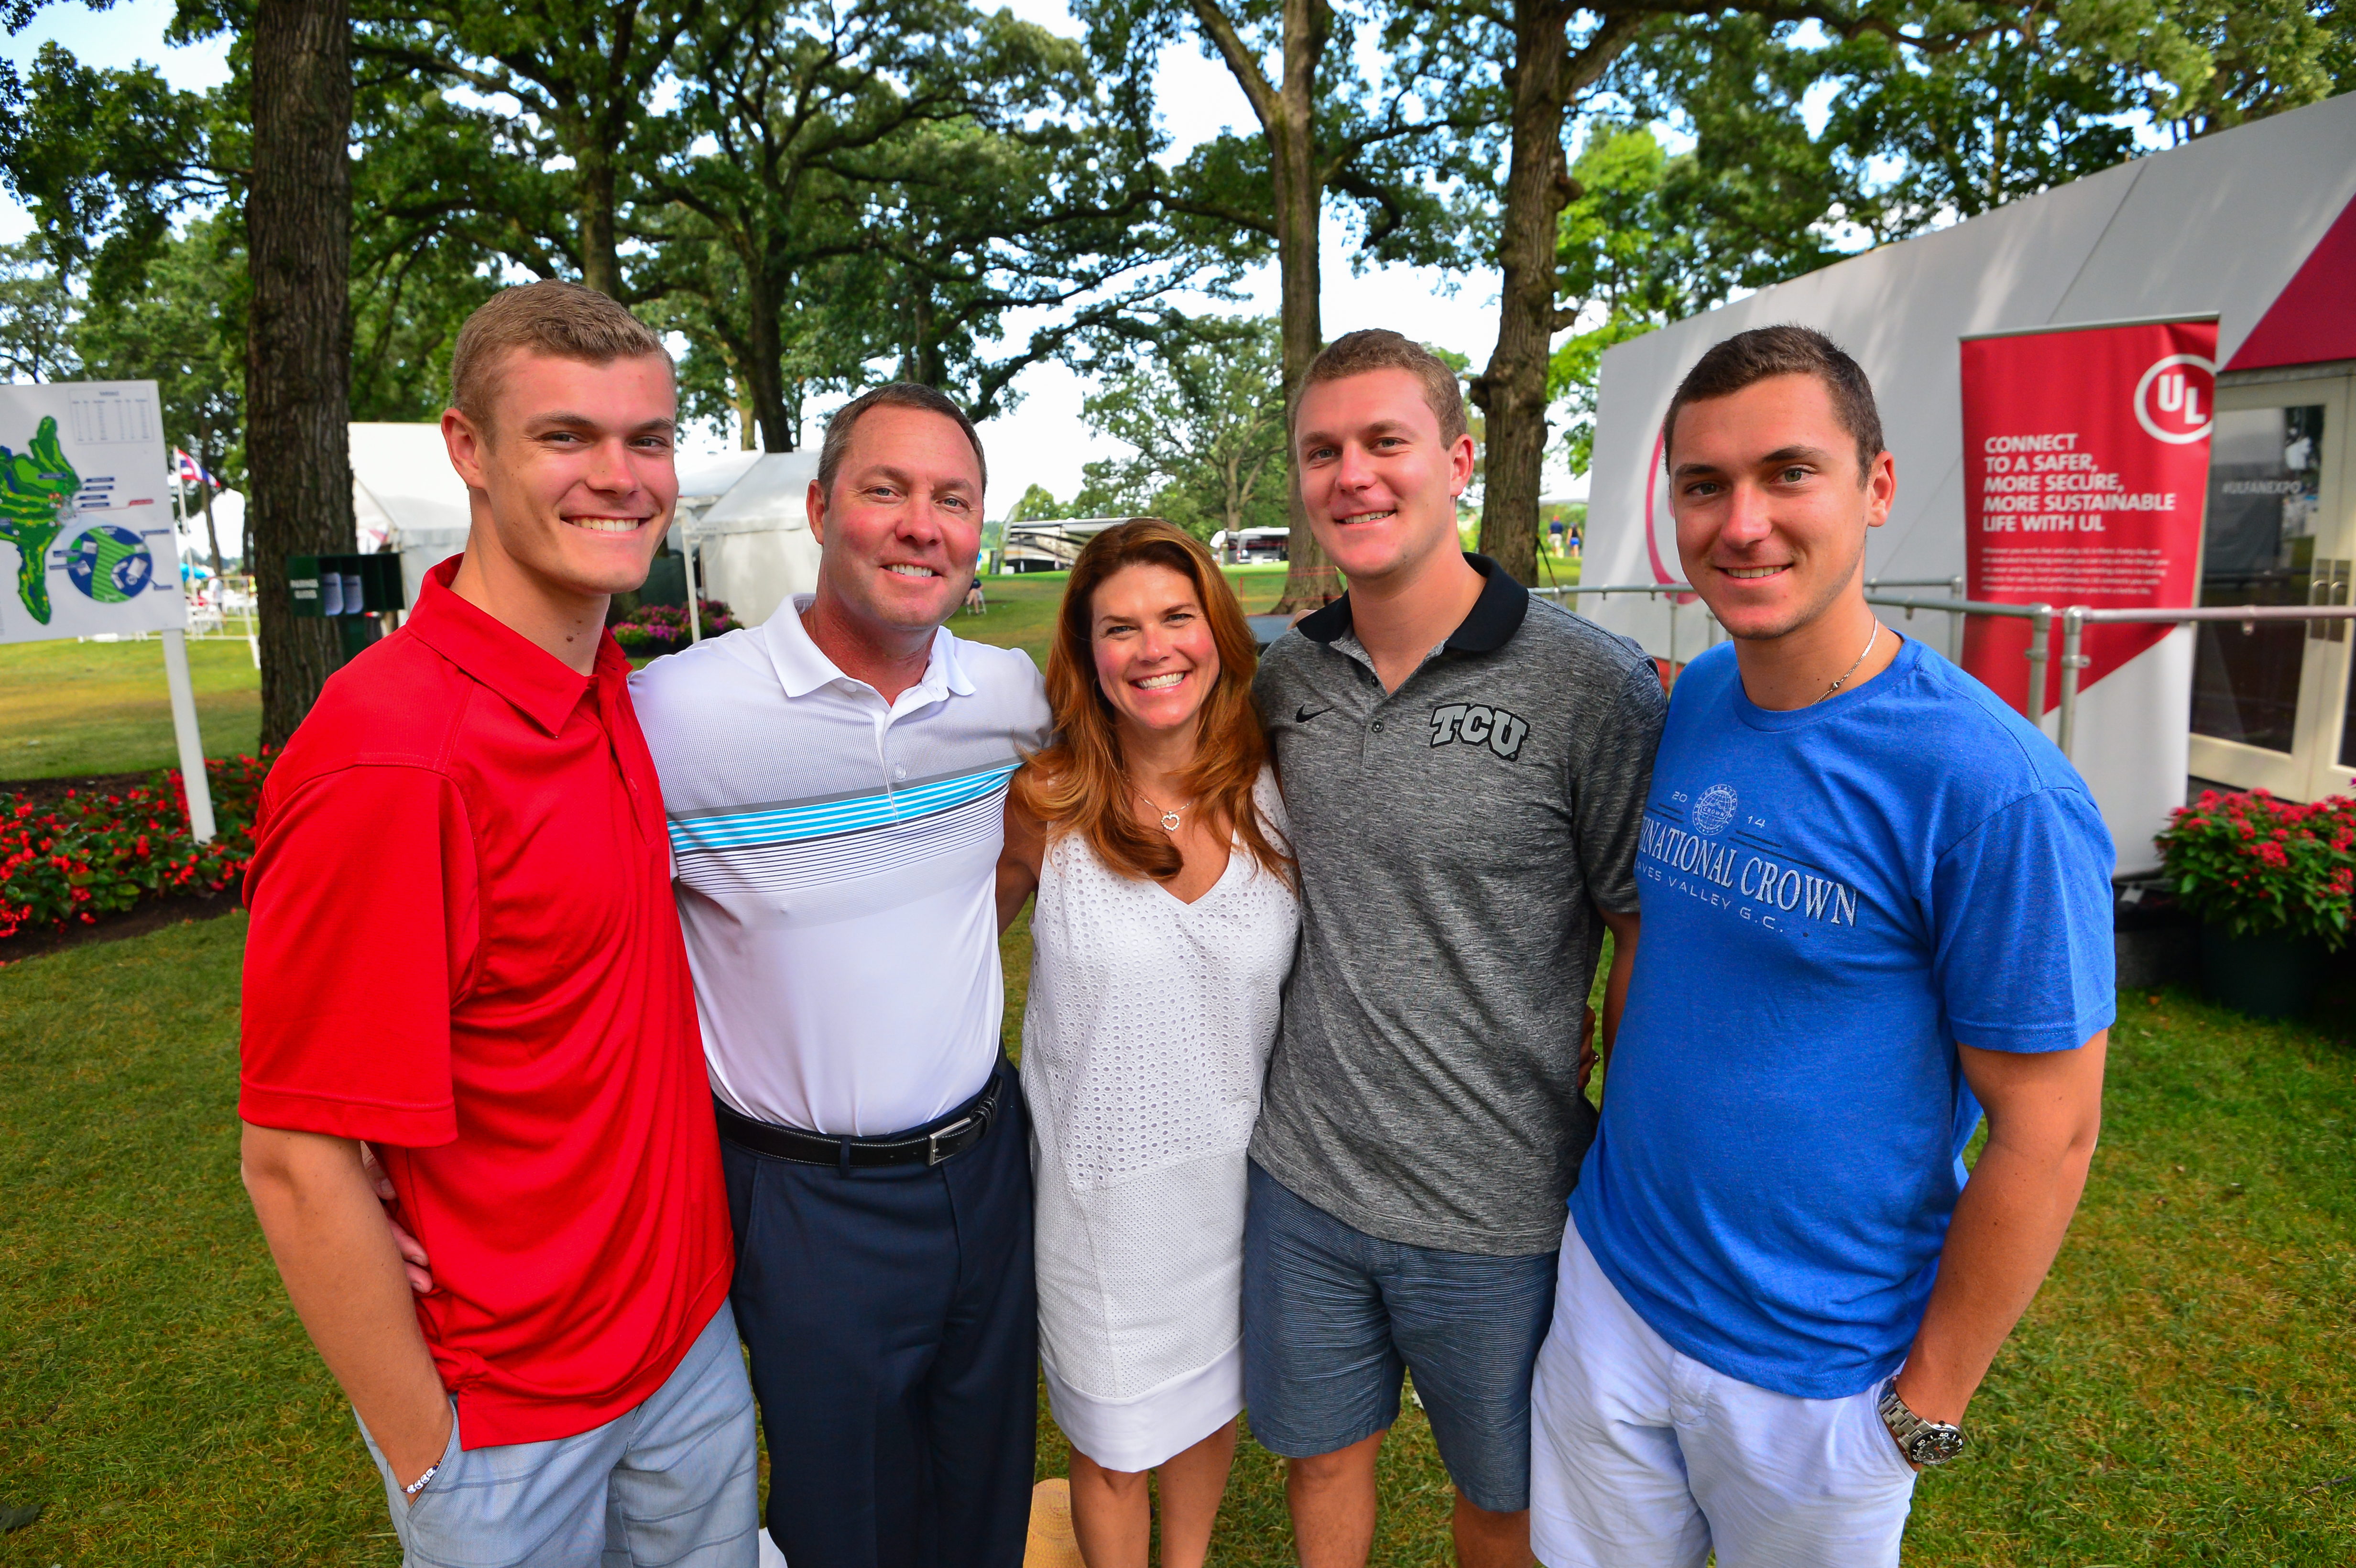 The Whan Family (from left  Connor, Mike, Meg, Austin, and Wes)